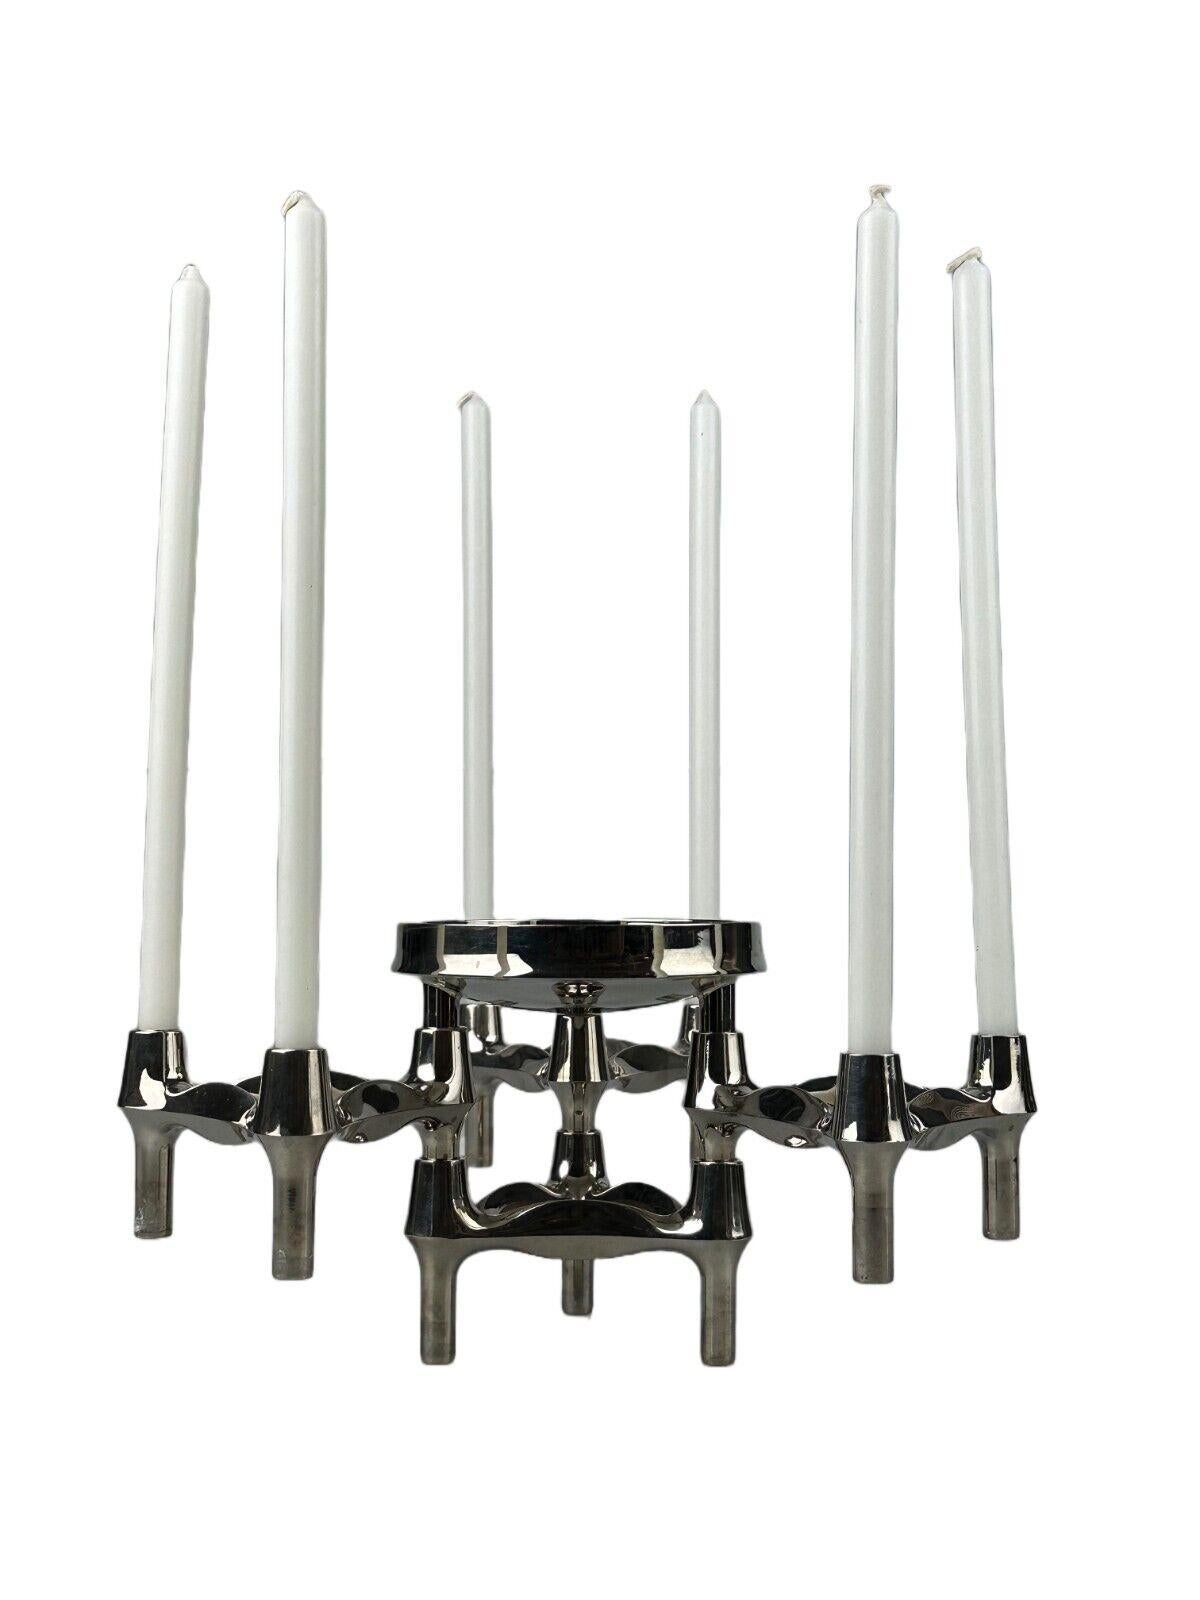 60s 70s BMF Nagel Quist candlestick 4 elements and bowl plug-in system

Item: Nagel candlestick set

Manufacturer: BMF

Condition: good - vintage

Age: around 1960-1970

Dimensions:

Width = 30cm
Depth = 30cm
Height = 14.5cm

Other notes:

The